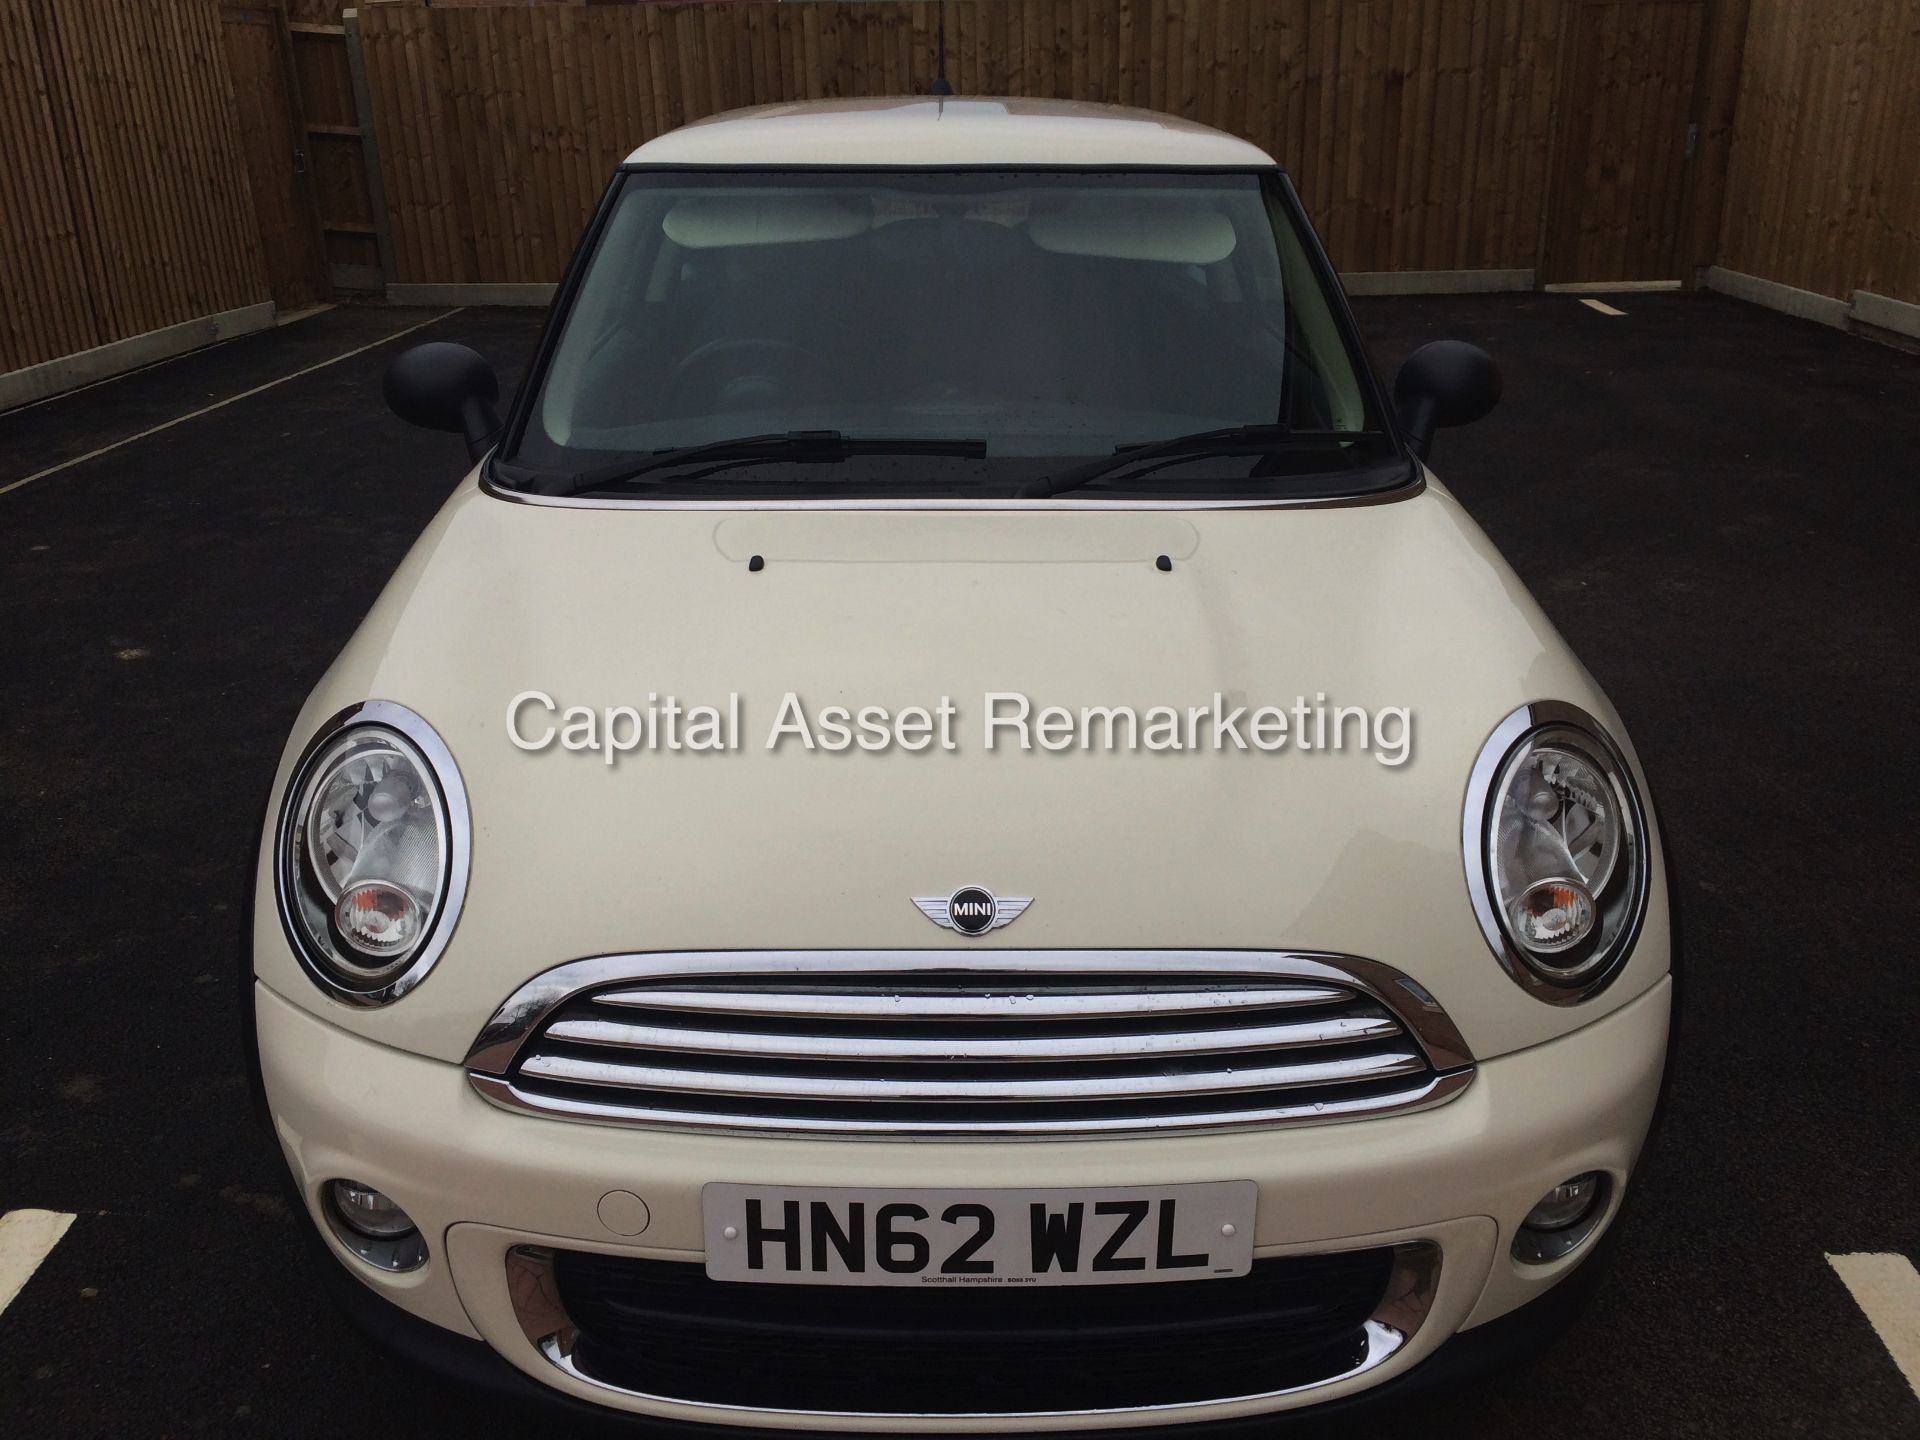 (ON SALE) MINI "ONE D" 1.6 DIESEL - WHITE (2013 MODEL) 1 OWNER - AIR CON / CLIMATE - SERVICE HISTORY - Image 2 of 18